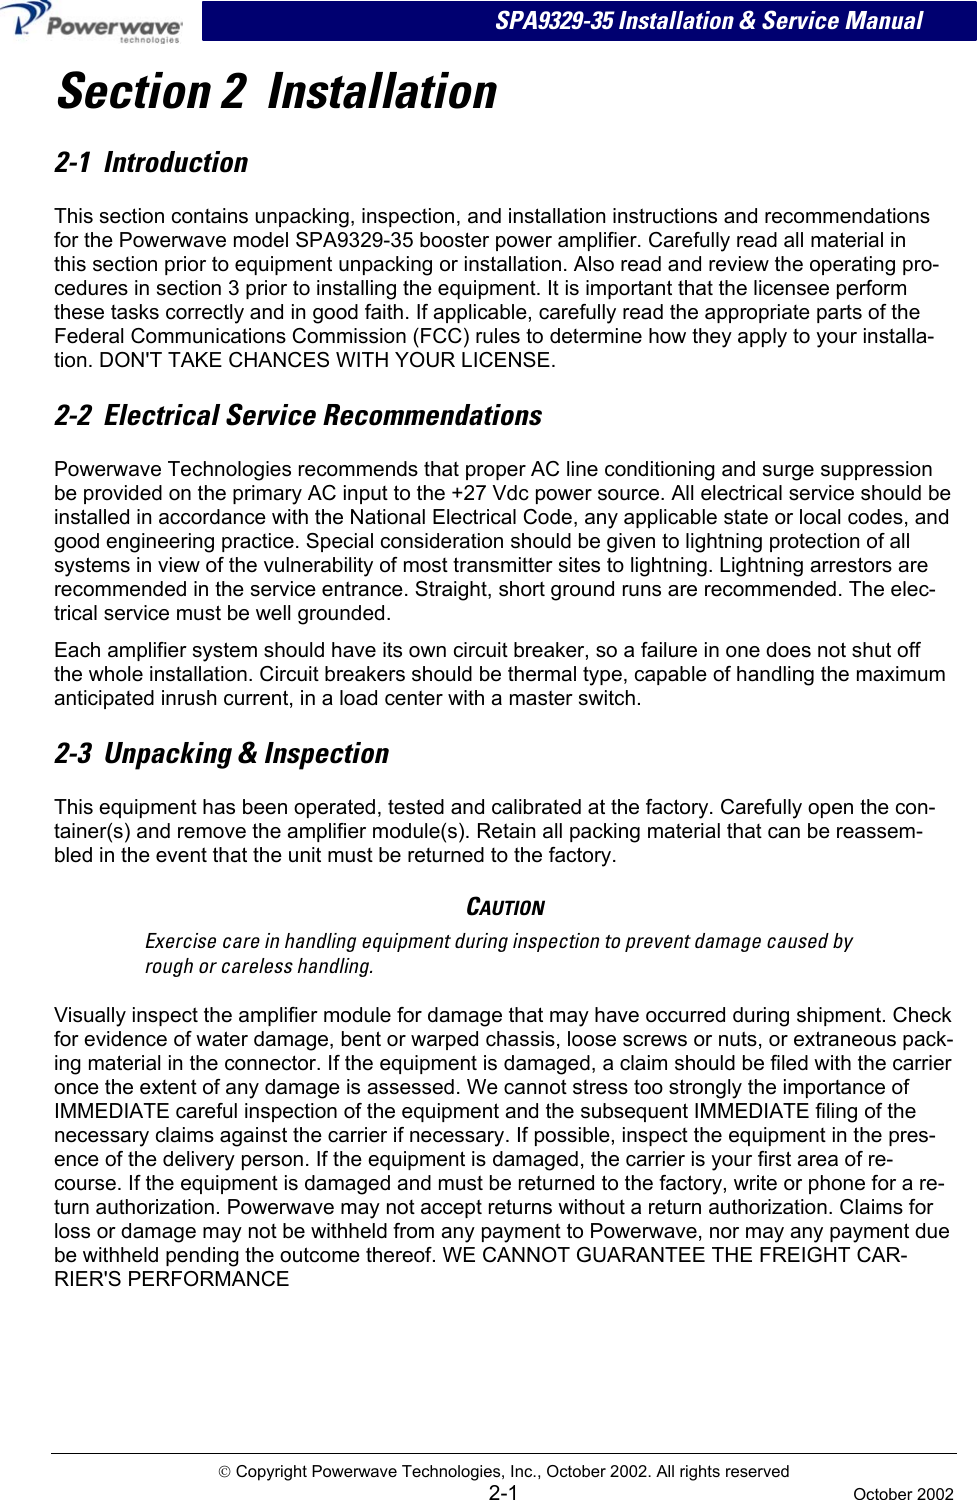  SPA9329-35 Installation &amp; Service Manual Section 2  Installation 2-1  Introduction This section contains unpacking, inspection, and installation instructions and recommendations for the Powerwave model SPA9329-35 booster power amplifier. Carefully read all material in this section prior to equipment unpacking or installation. Also read and review the operating pro-cedures in section 3 prior to installing the equipment. It is important that the licensee perform these tasks correctly and in good faith. If applicable, carefully read the appropriate parts of the Federal Communications Commission (FCC) rules to determine how they apply to your installa-tion. DON&apos;T TAKE CHANCES WITH YOUR LICENSE. 2-2  Electrical Service Recommendations Powerwave Technologies recommends that proper AC line conditioning and surge suppression be provided on the primary AC input to the +27 Vdc power source. All electrical service should be installed in accordance with the National Electrical Code, any applicable state or local codes, and good engineering practice. Special consideration should be given to lightning protection of all systems in view of the vulnerability of most transmitter sites to lightning. Lightning arrestors are recommended in the service entrance. Straight, short ground runs are recommended. The elec-trical service must be well grounded. Each amplifier system should have its own circuit breaker, so a failure in one does not shut off the whole installation. Circuit breakers should be thermal type, capable of handling the maximum anticipated inrush current, in a load center with a master switch. 2-3  Unpacking &amp; Inspection This equipment has been operated, tested and calibrated at the factory. Carefully open the con-tainer(s) and remove the amplifier module(s). Retain all packing material that can be reassem-bled in the event that the unit must be returned to the factory. CAUTION Exercise care in handling equipment during inspection to prevent damage caused by rough or careless handling. Visually inspect the amplifier module for damage that may have occurred during shipment. Check for evidence of water damage, bent or warped chassis, loose screws or nuts, or extraneous pack-ing material in the connector. If the equipment is damaged, a claim should be filed with the carrier once the extent of any damage is assessed. We cannot stress too strongly the importance of IMMEDIATE careful inspection of the equipment and the subsequent IMMEDIATE filing of the necessary claims against the carrier if necessary. If possible, inspect the equipment in the pres-ence of the delivery person. If the equipment is damaged, the carrier is your first area of re-course. If the equipment is damaged and must be returned to the factory, write or phone for a re-turn authorization. Powerwave may not accept returns without a return authorization. Claims for loss or damage may not be withheld from any payment to Powerwave, nor may any payment due be withheld pending the outcome thereof. WE CANNOT GUARANTEE THE FREIGHT CAR-RIER&apos;S PERFORMANCE  Copyright Powerwave Technologies, Inc., October 2002. All rights reserved  2-1  October 2002 